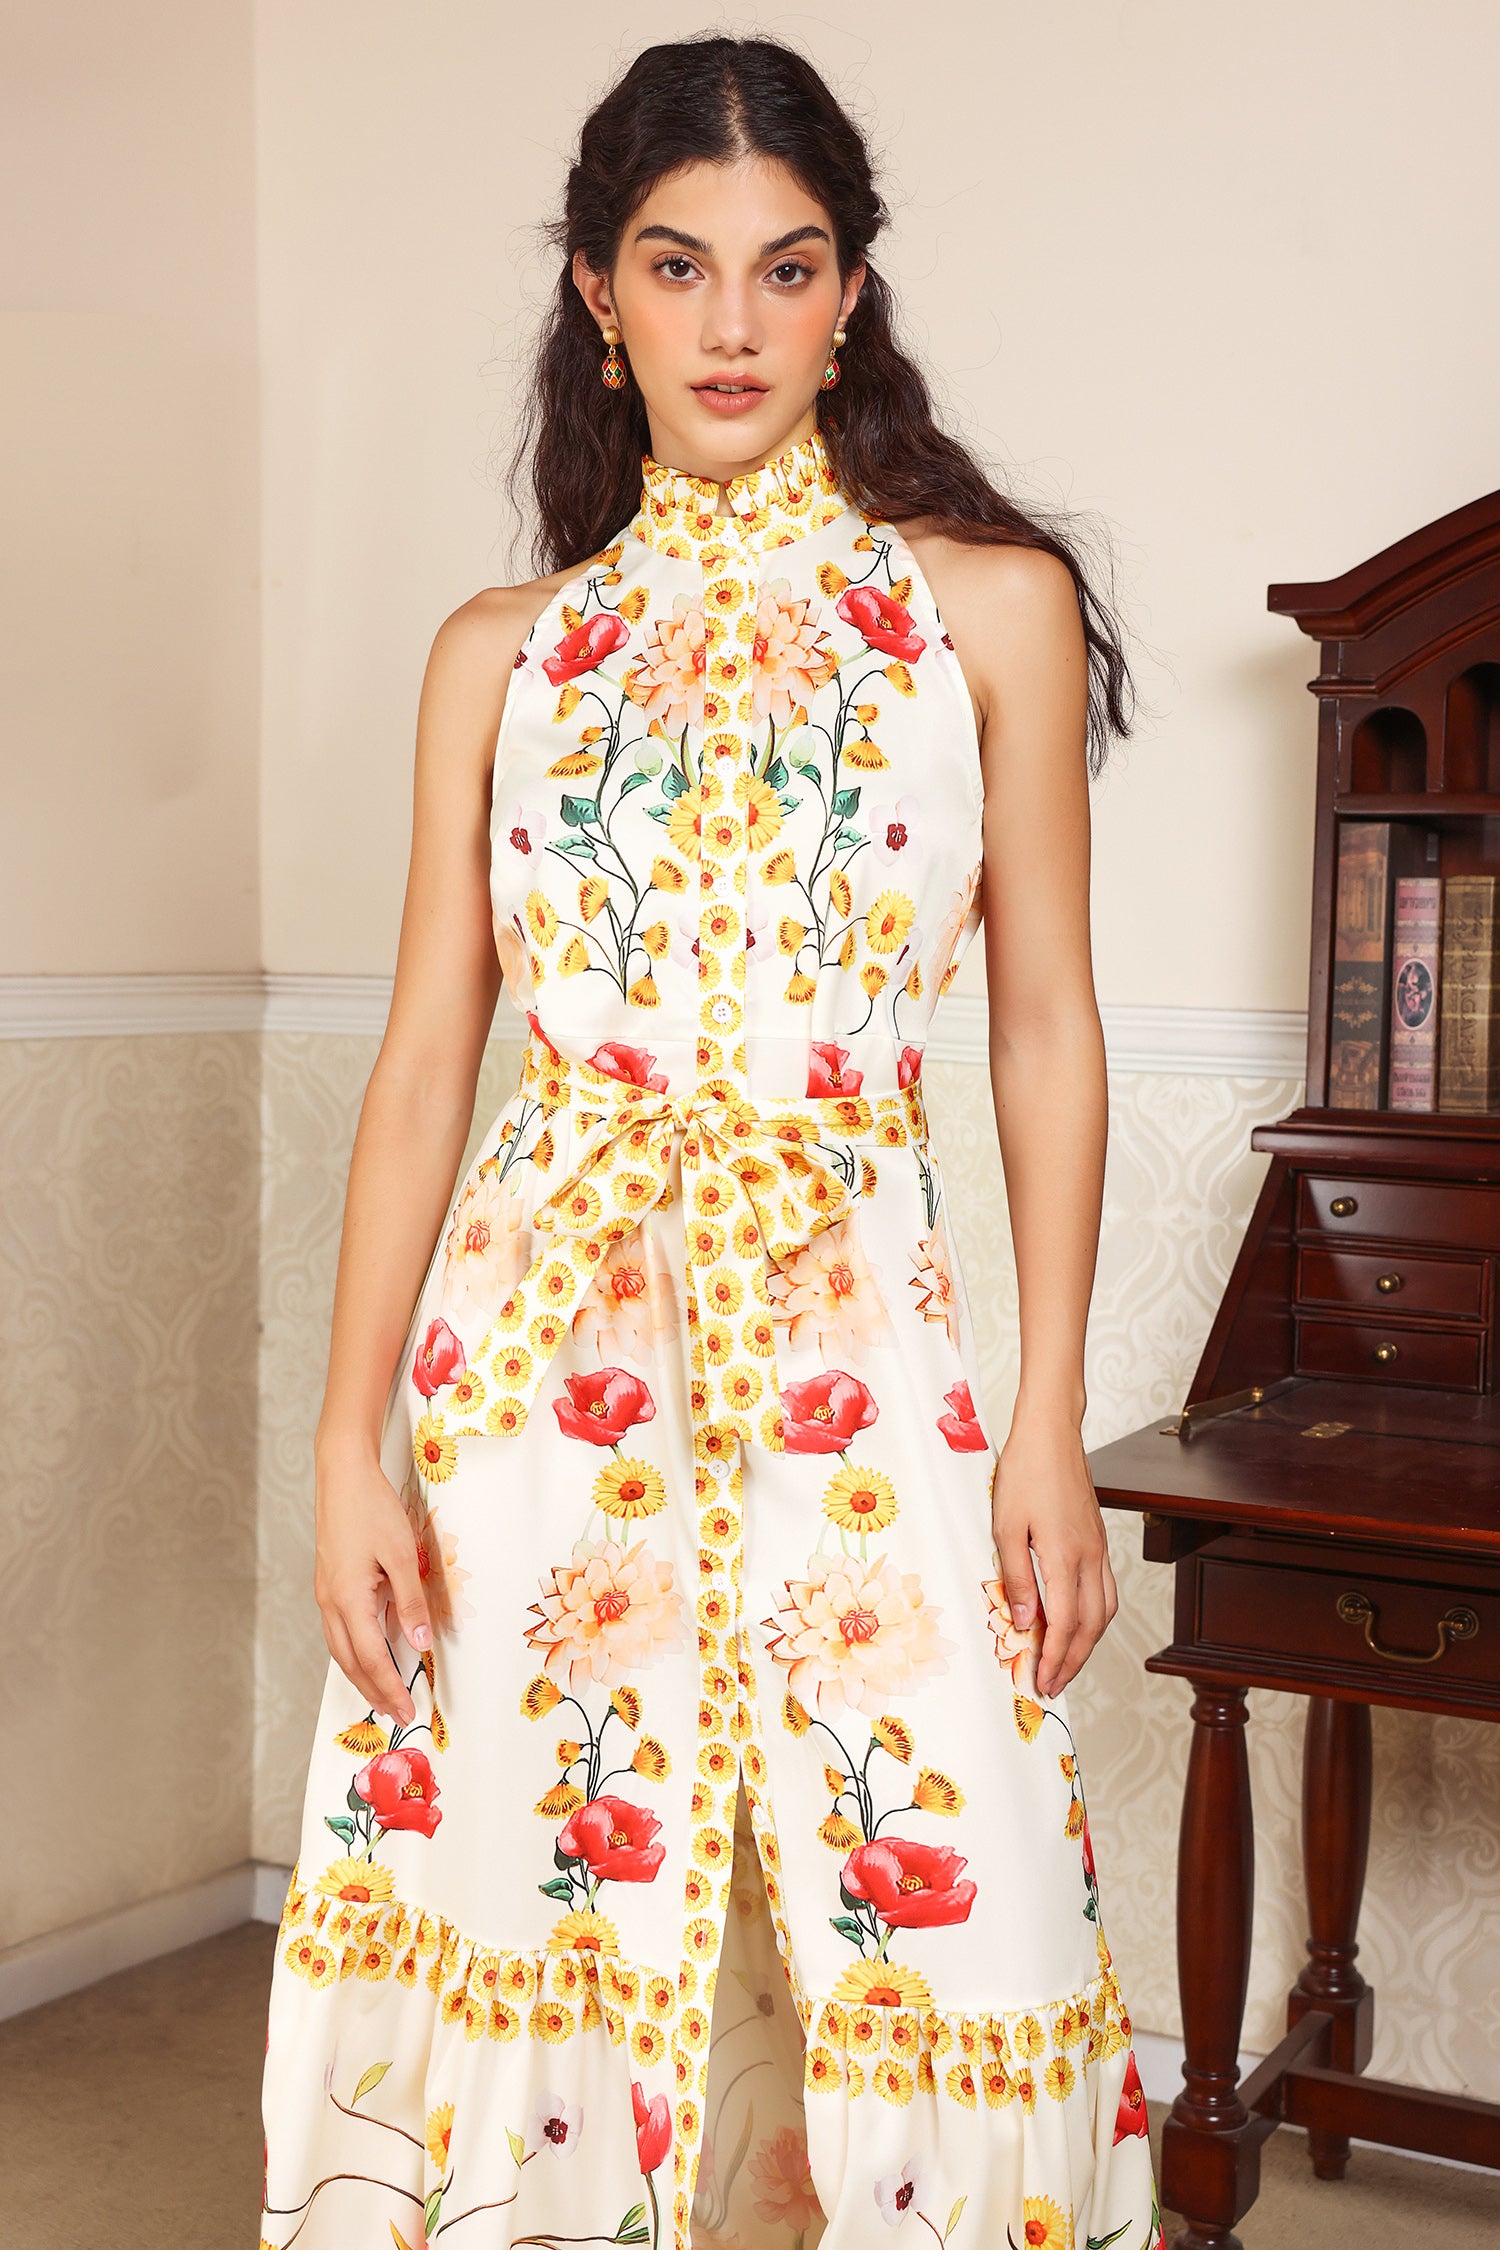 Floral High Collar Sleeveless Buttoned Lace Up Midi Dress Yellow